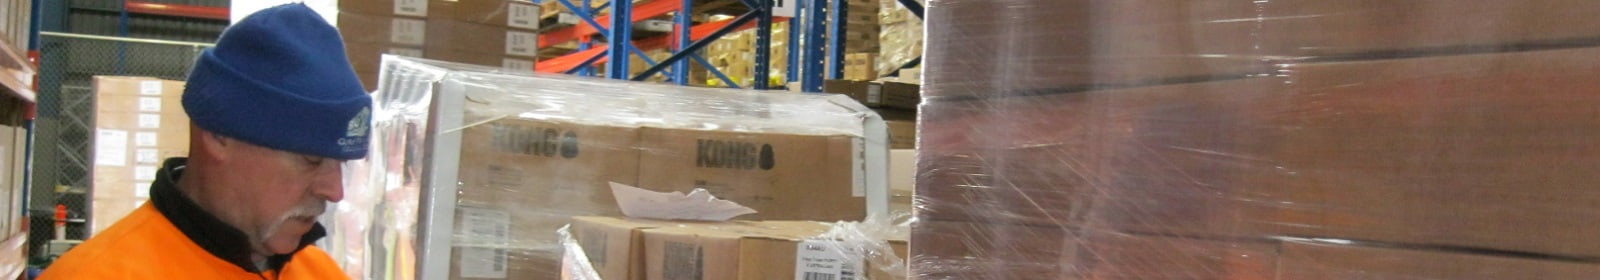 A KONG employee works in a warehouse